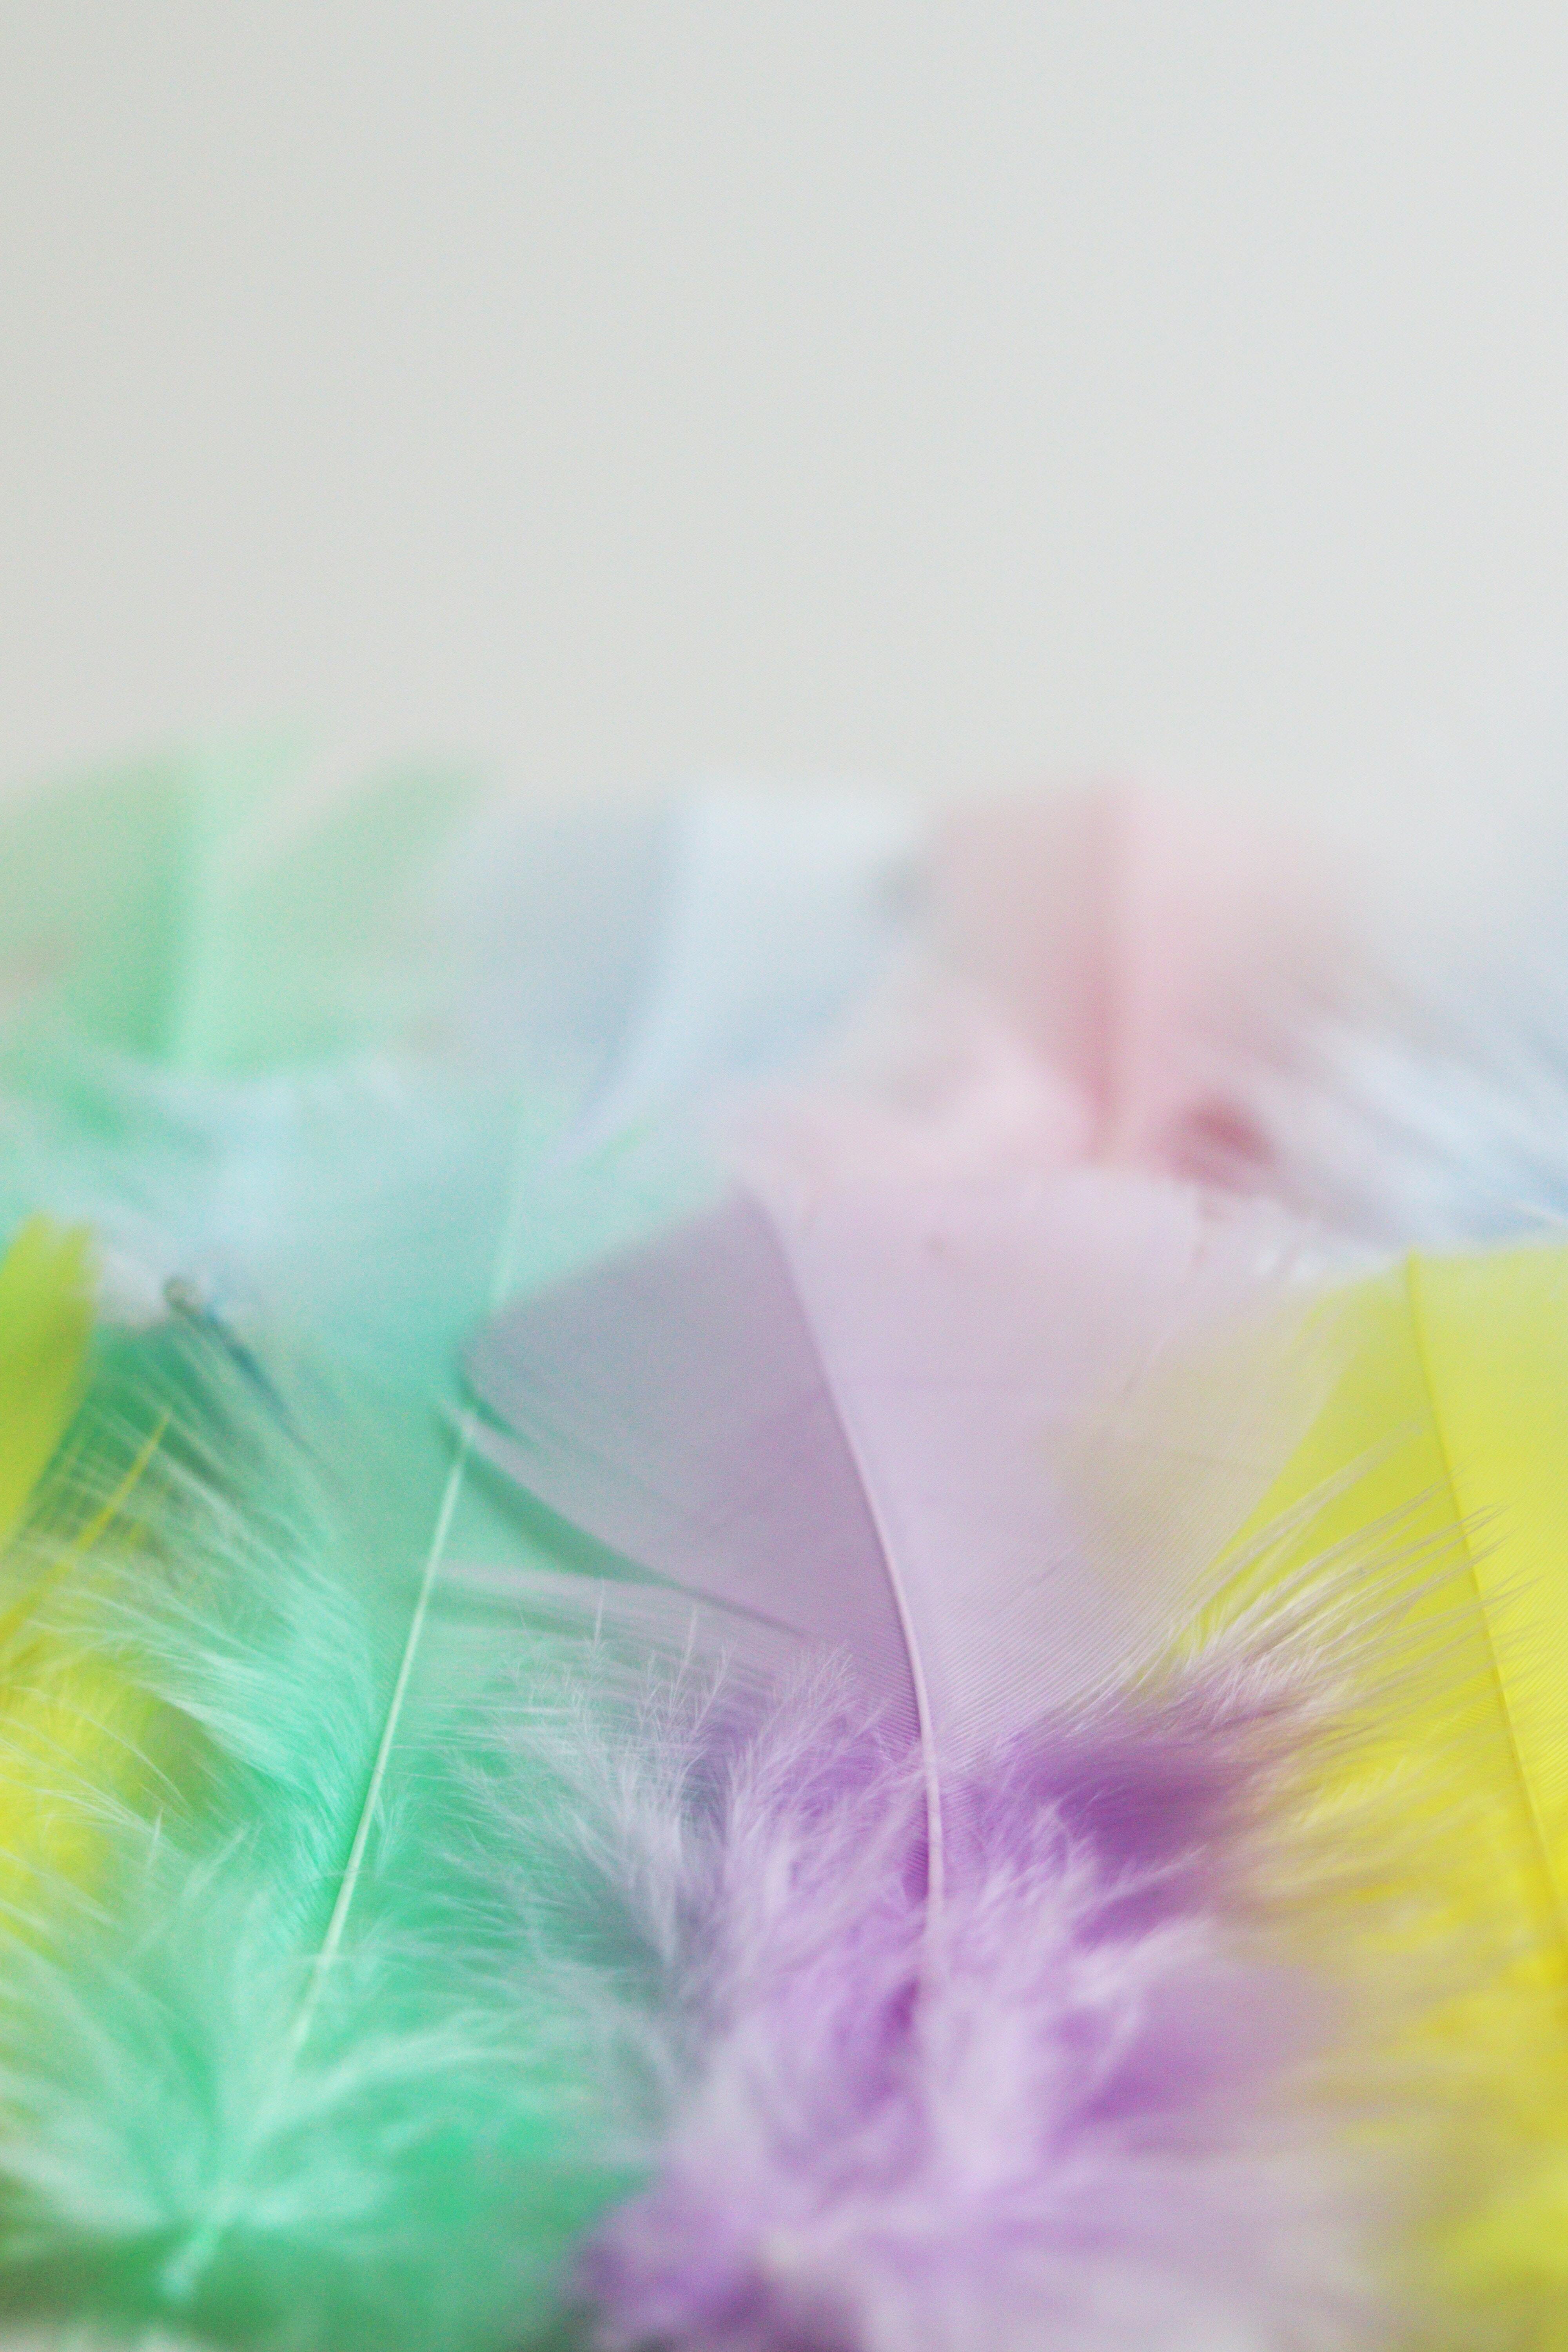 Image: Feathers, multicolored, quantity